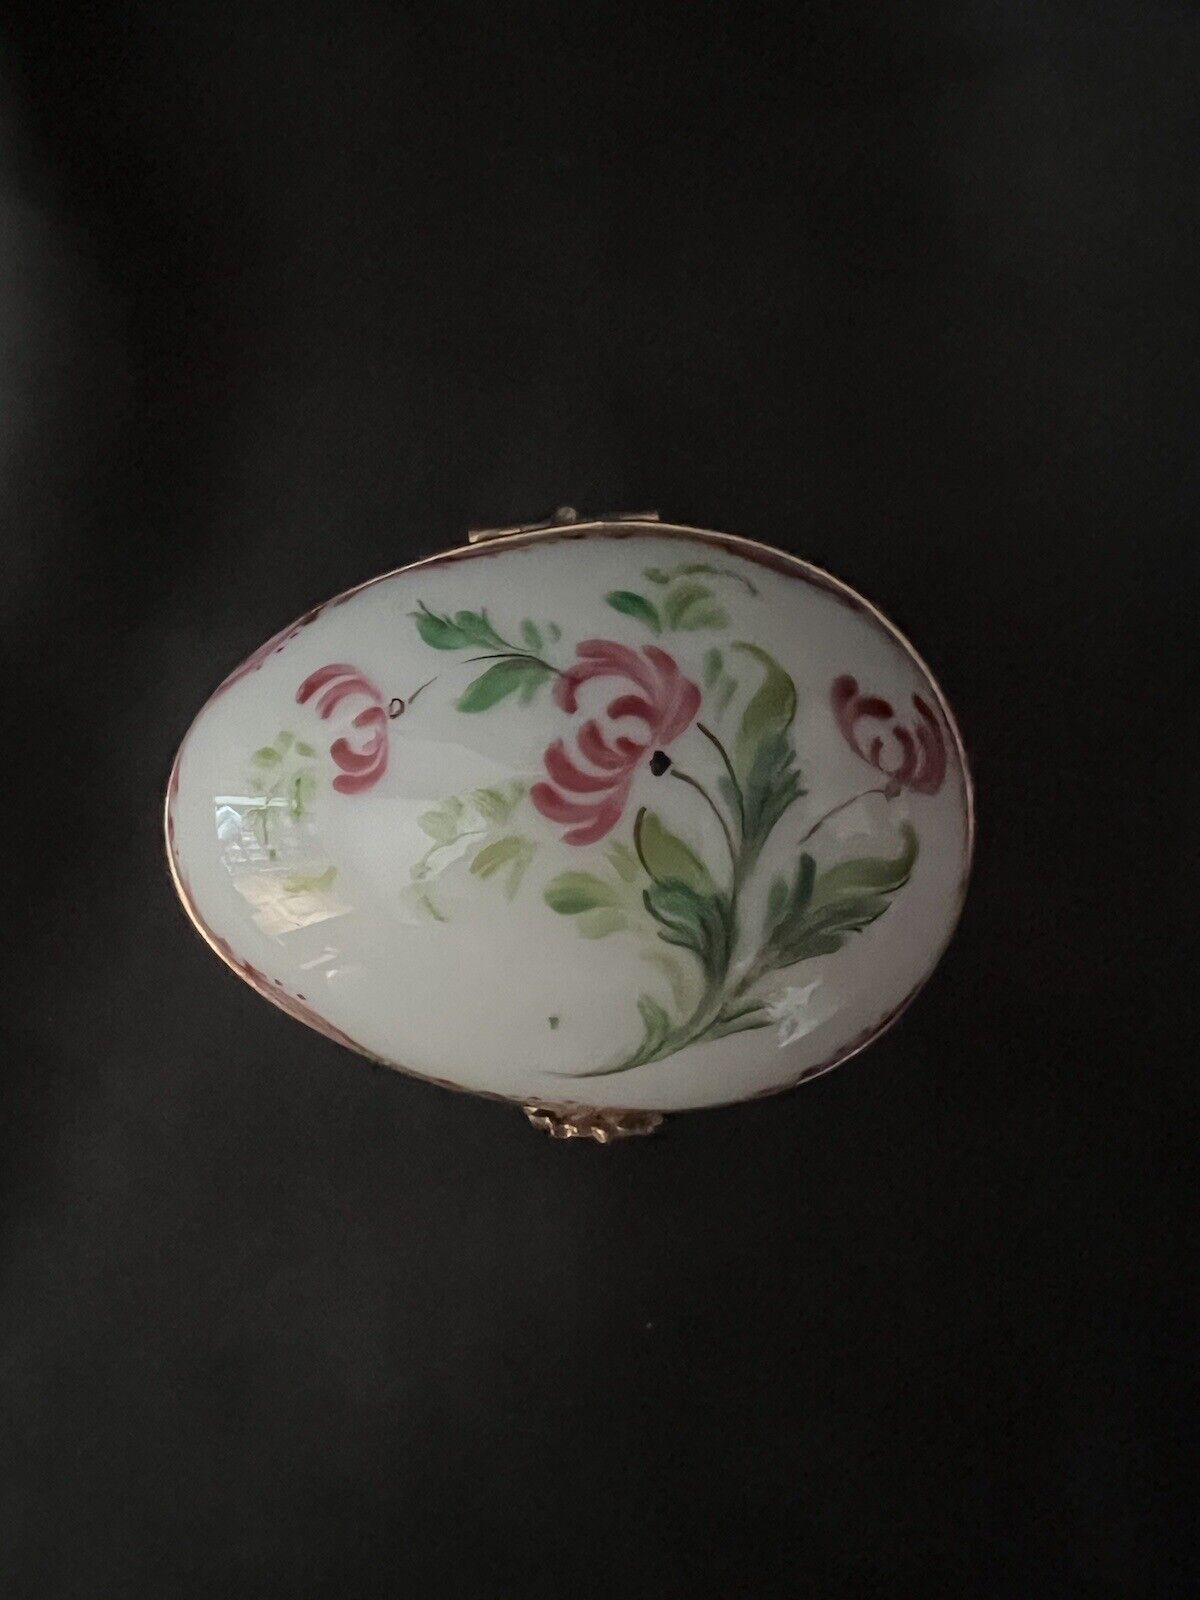  HAND-PAINTED LIMOGES PORCELAIN EGG SHAPED JEWELRY BOX